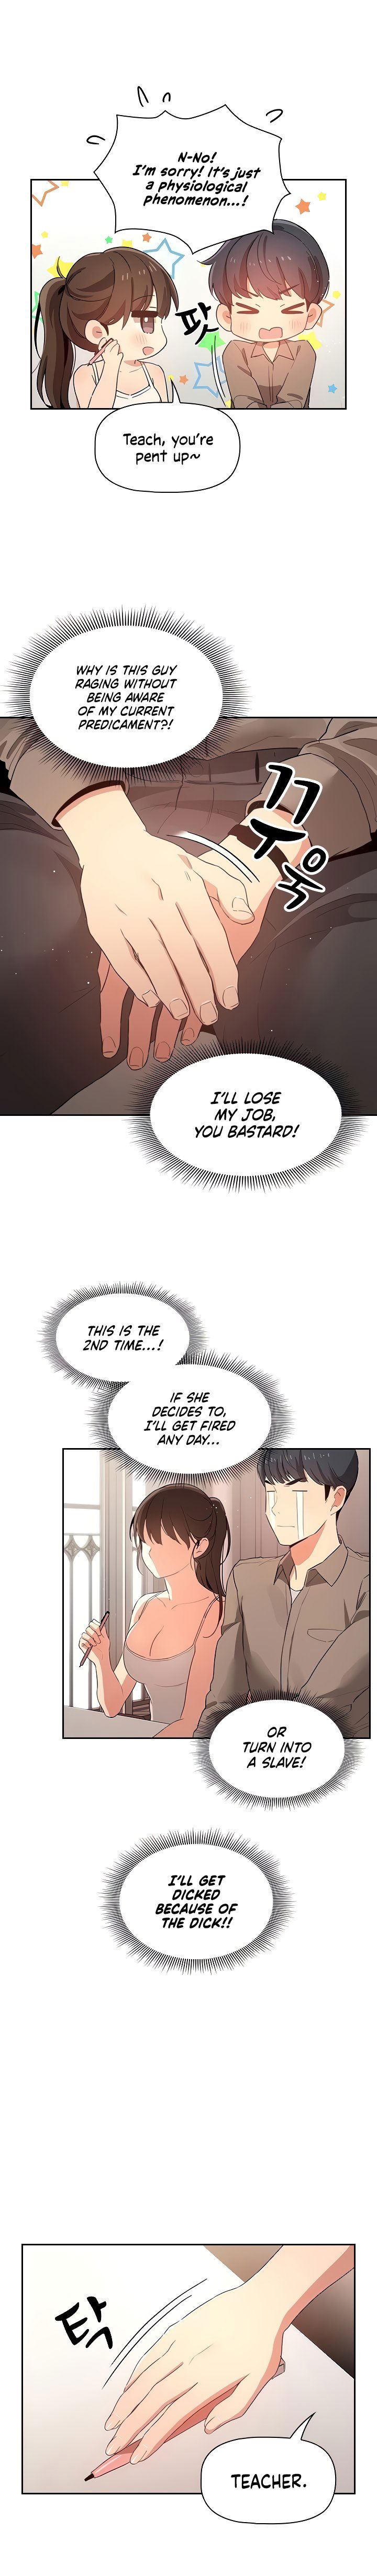 private-tutoring-in-these-trying-times-chap-3-17